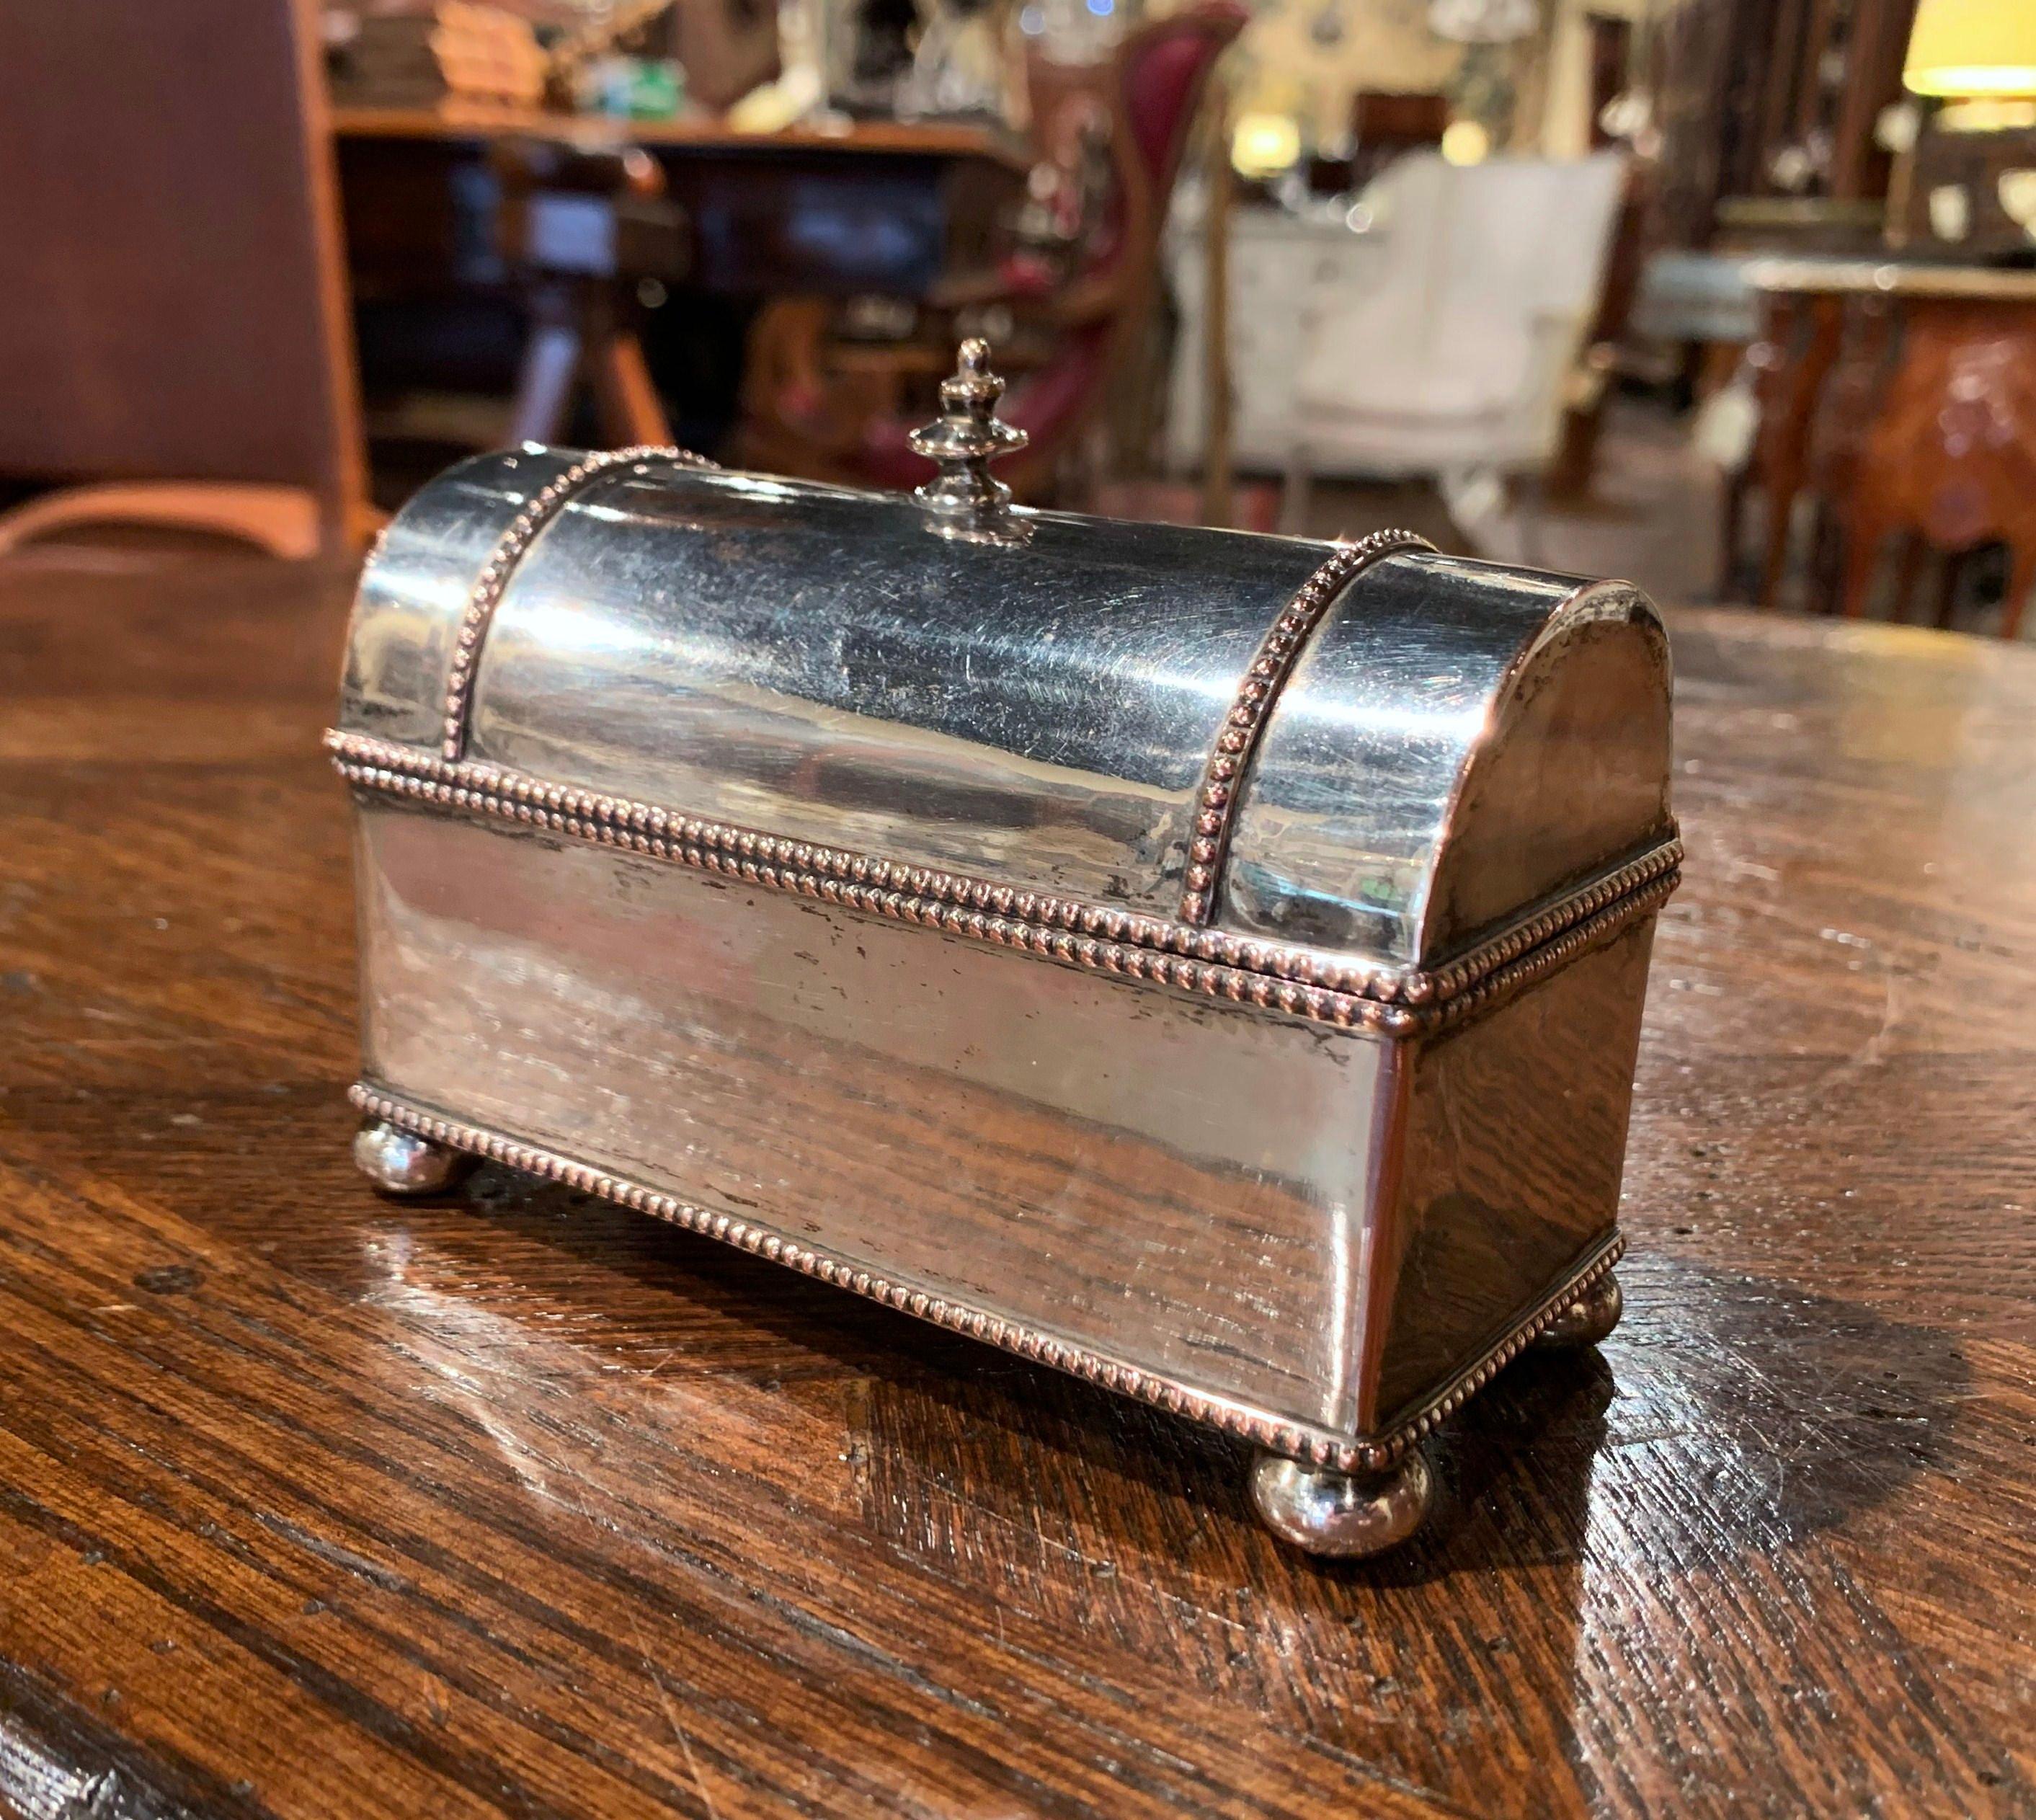 This elegant antique inkwell was created in France circa 1880, made of copper and silver plated, the trunk shape desk accessory stands on bun feet, and the bombe top opens to reveal two inside square glass ink containers. The small inkwell with bead